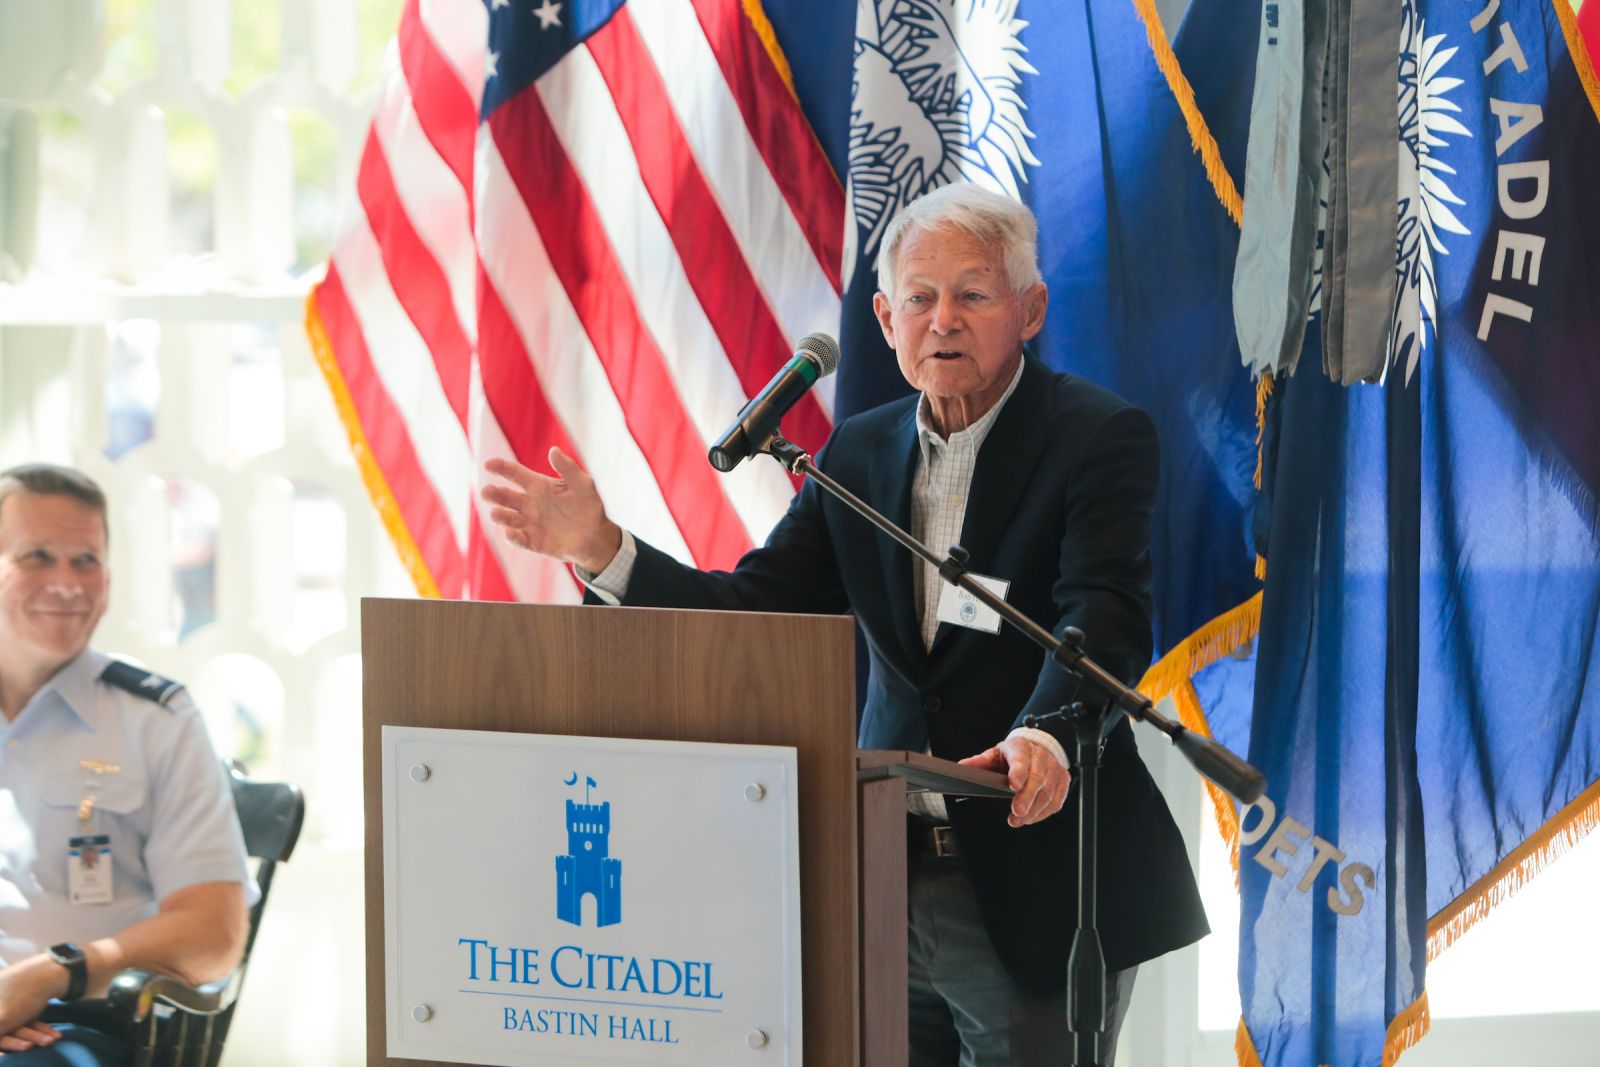 Rick Bastin, class of 1965, speaks at the ribbon-cutting ceremony for The Citadel's newest academic building Bastin Hall. (Photo/Provided)